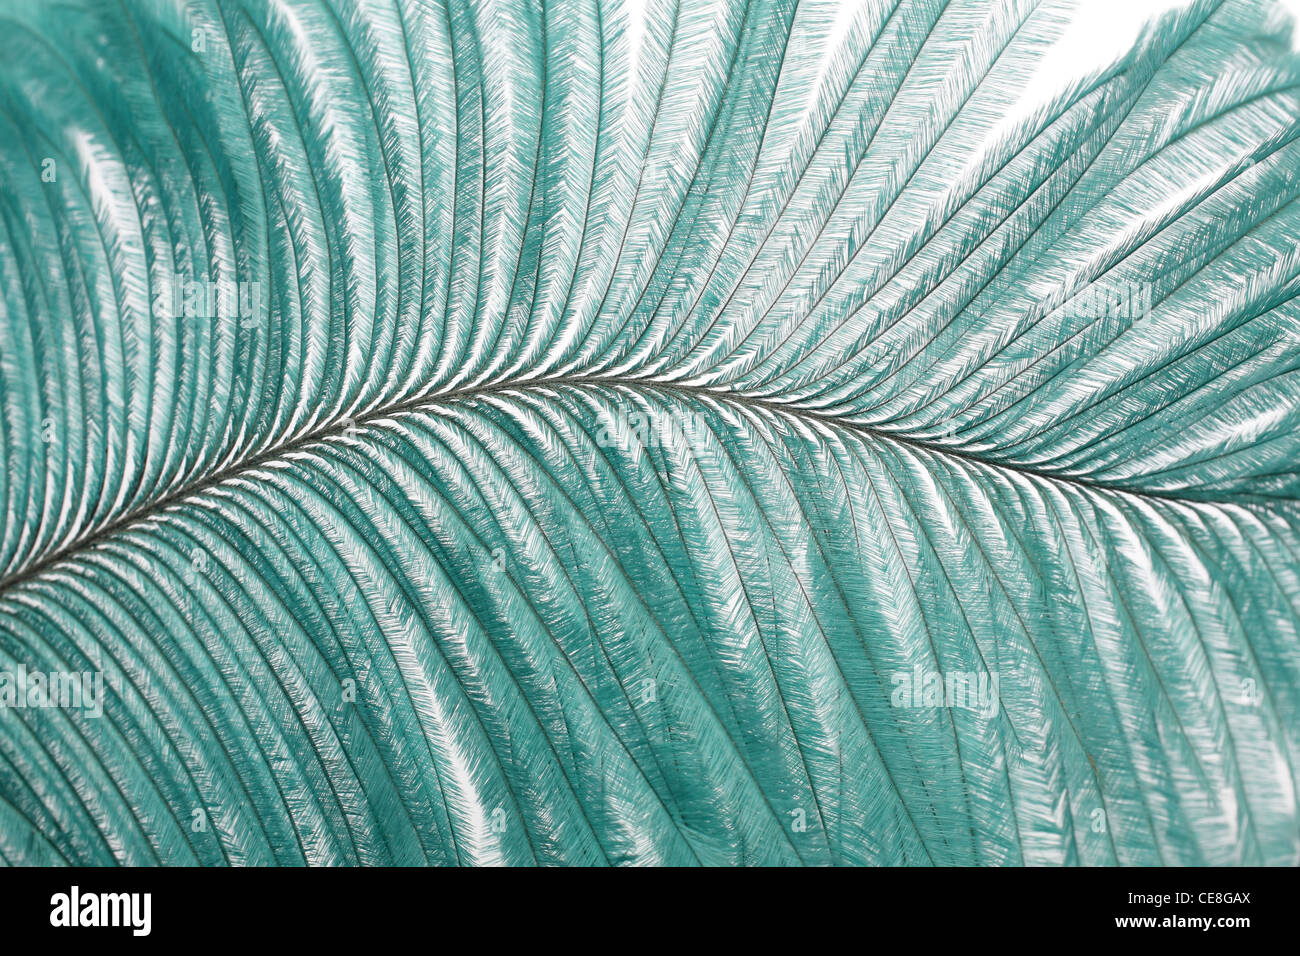 closeup large turquoise feather showing detail Stock Photo